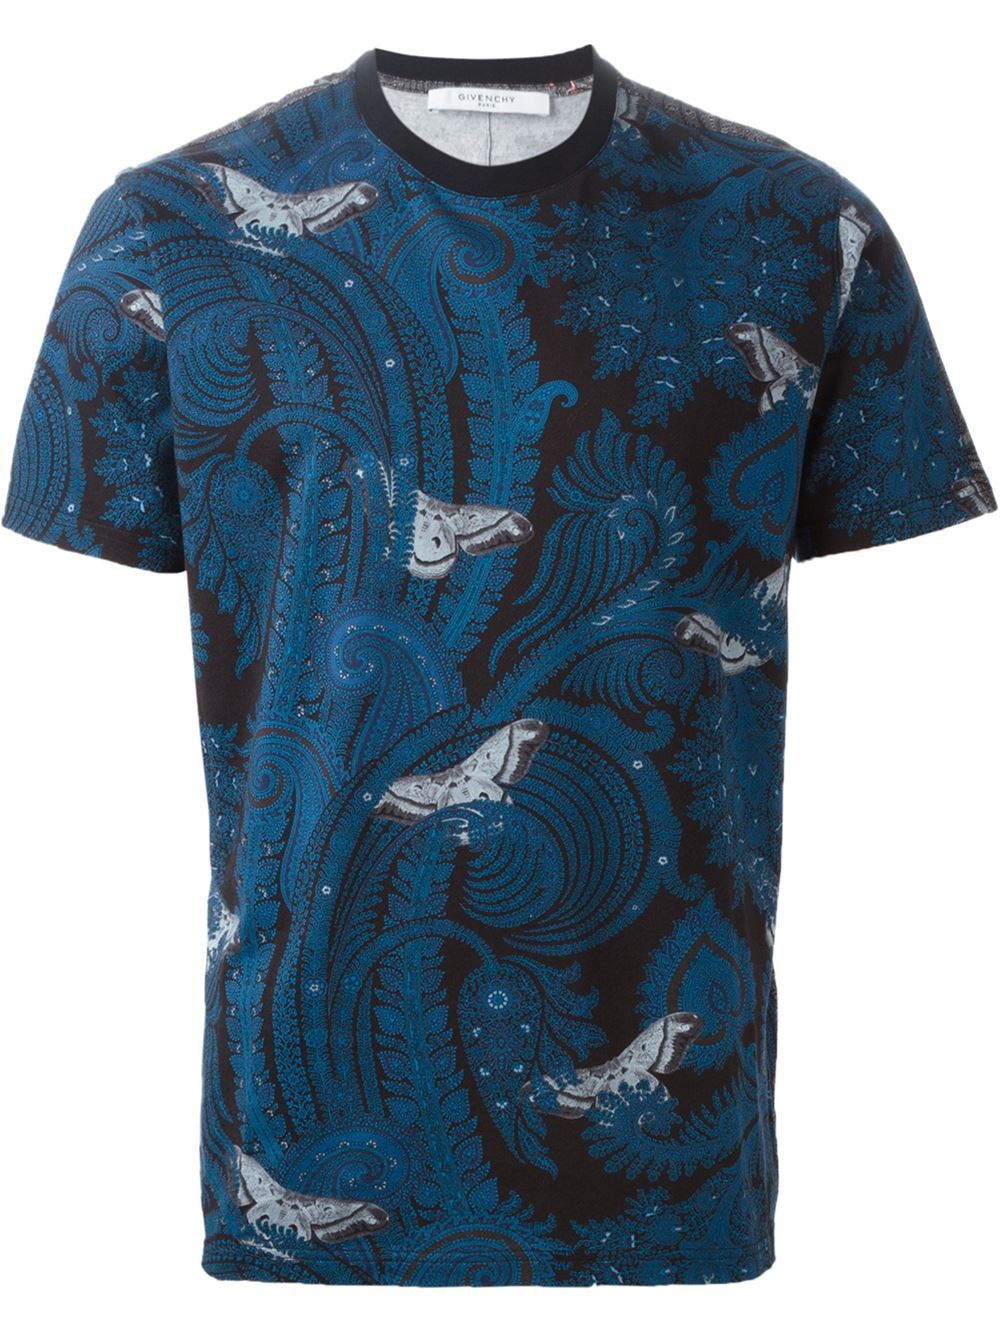 Givenchy Paisley-Print T-Shirt in Blue for Men - Lyst